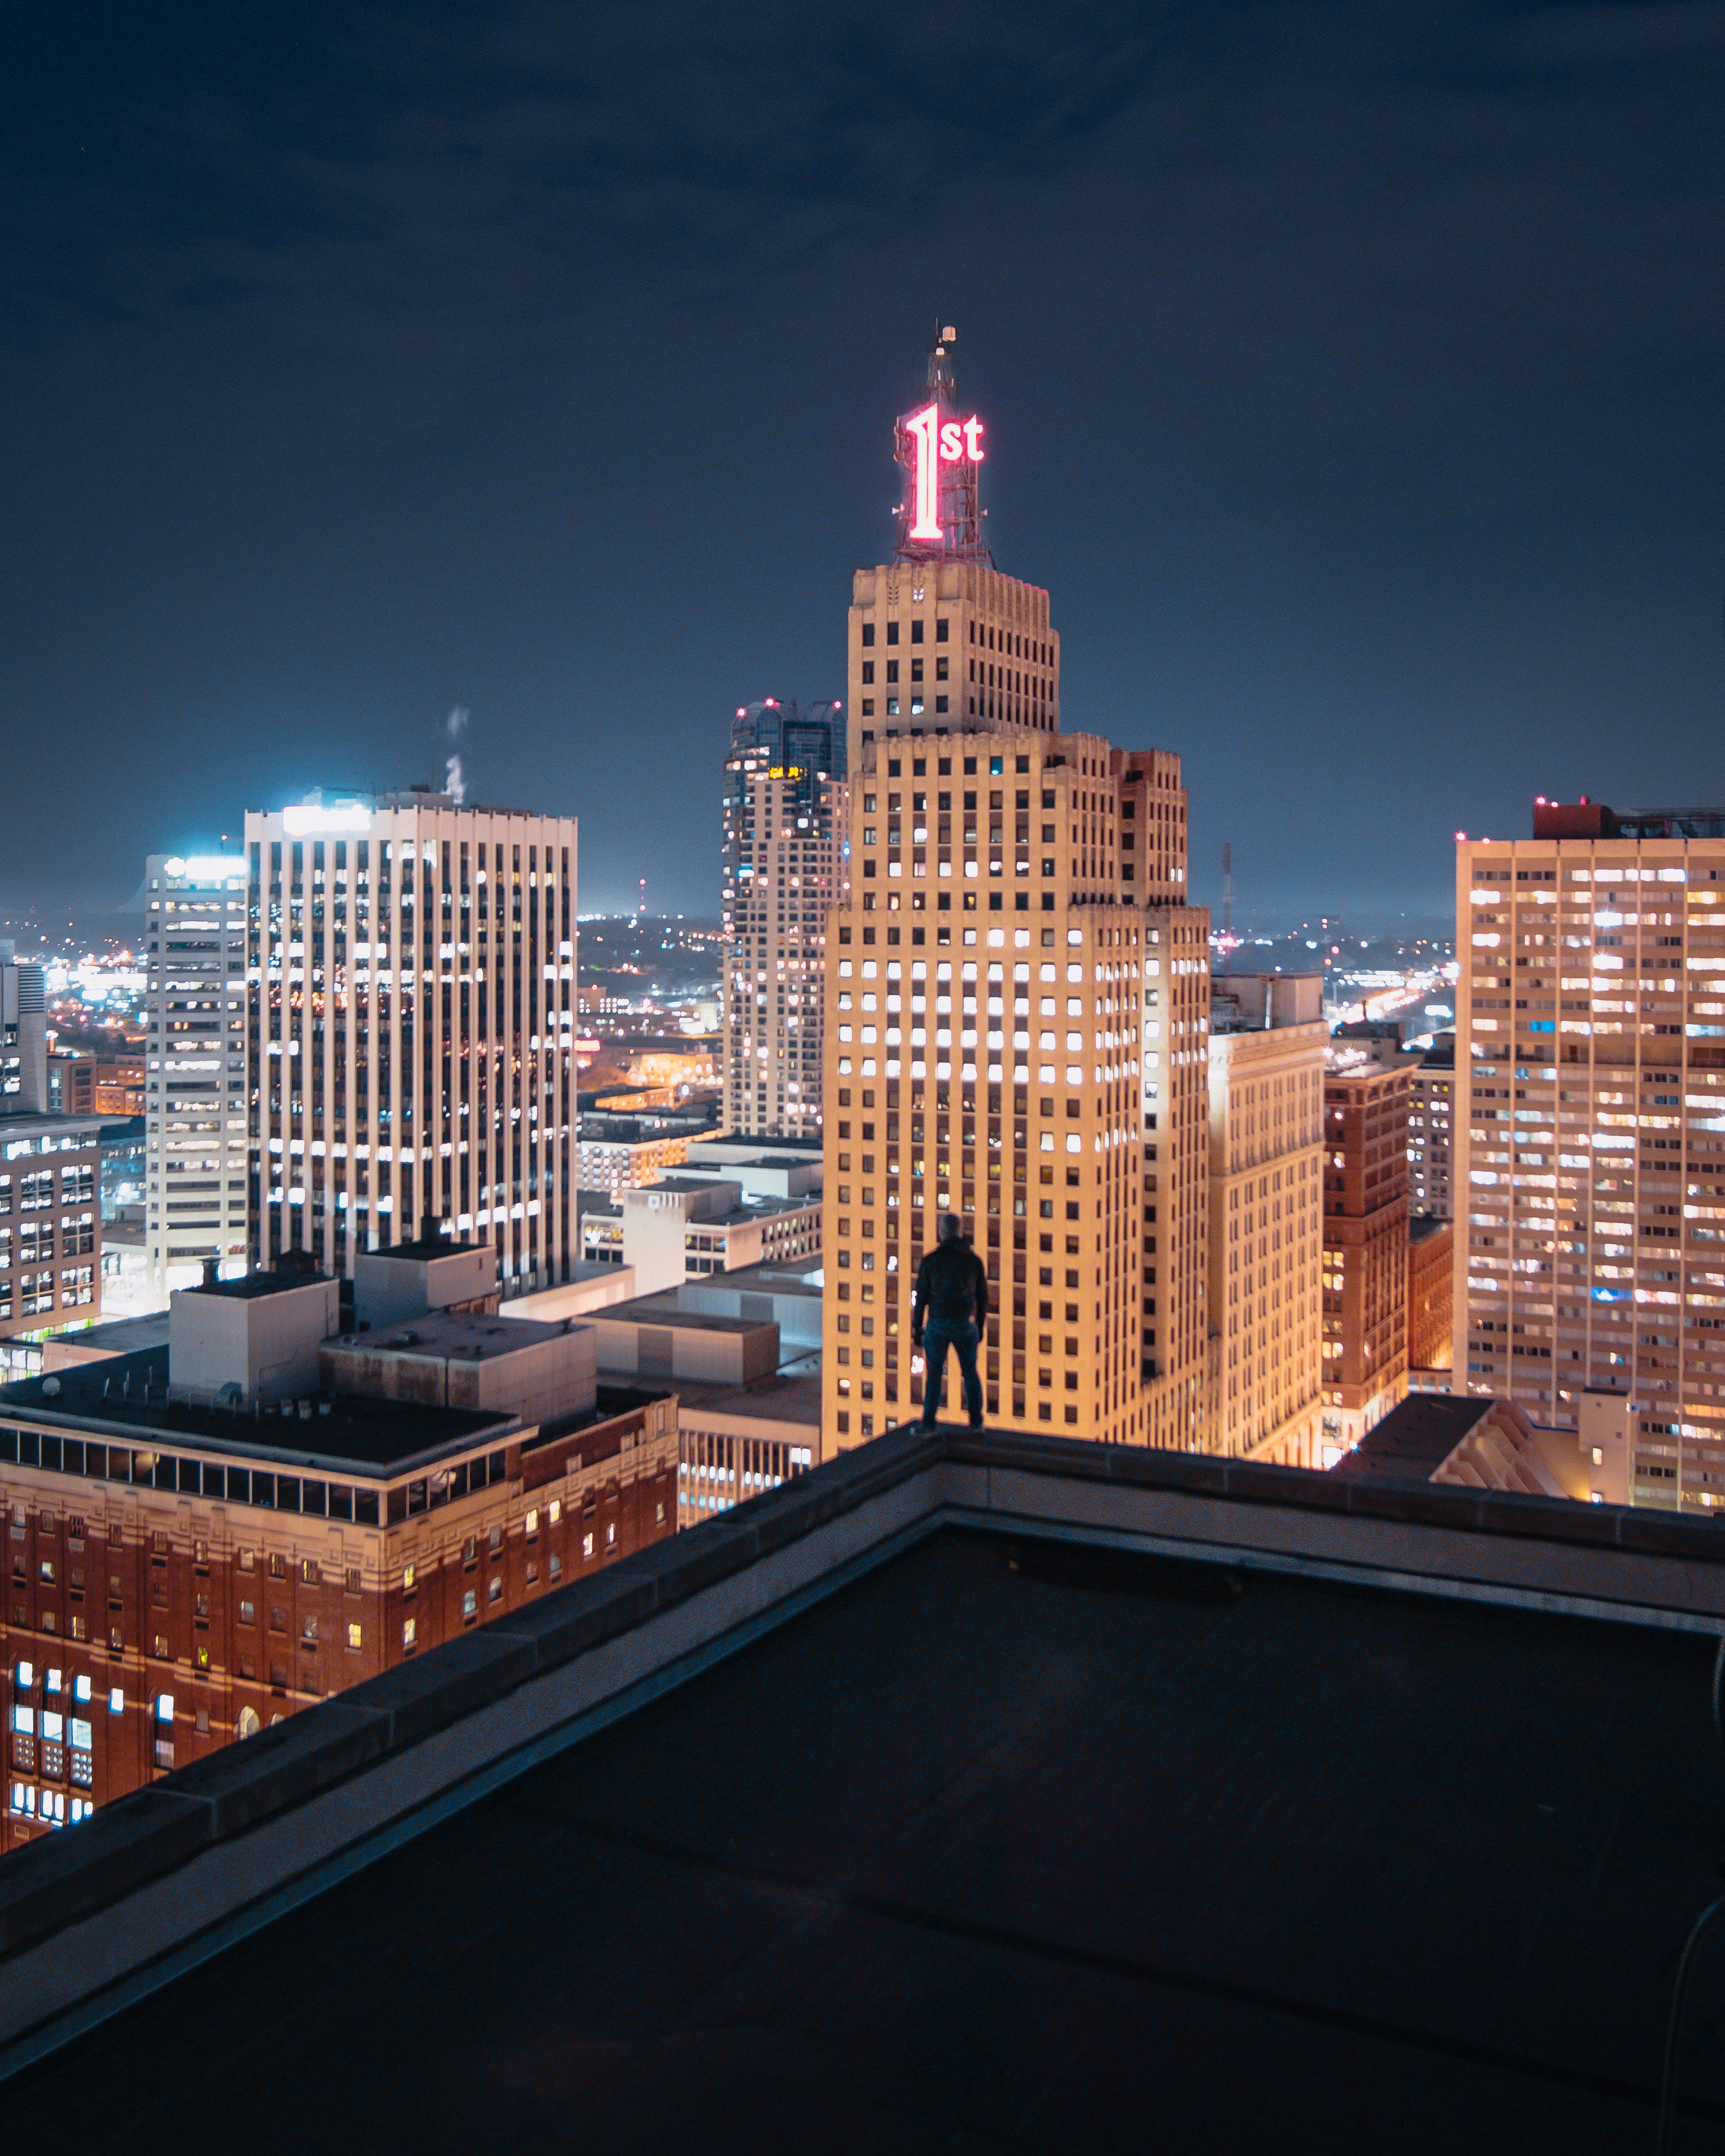 lights, night city, cities, building, silhouette, overview, review, roof